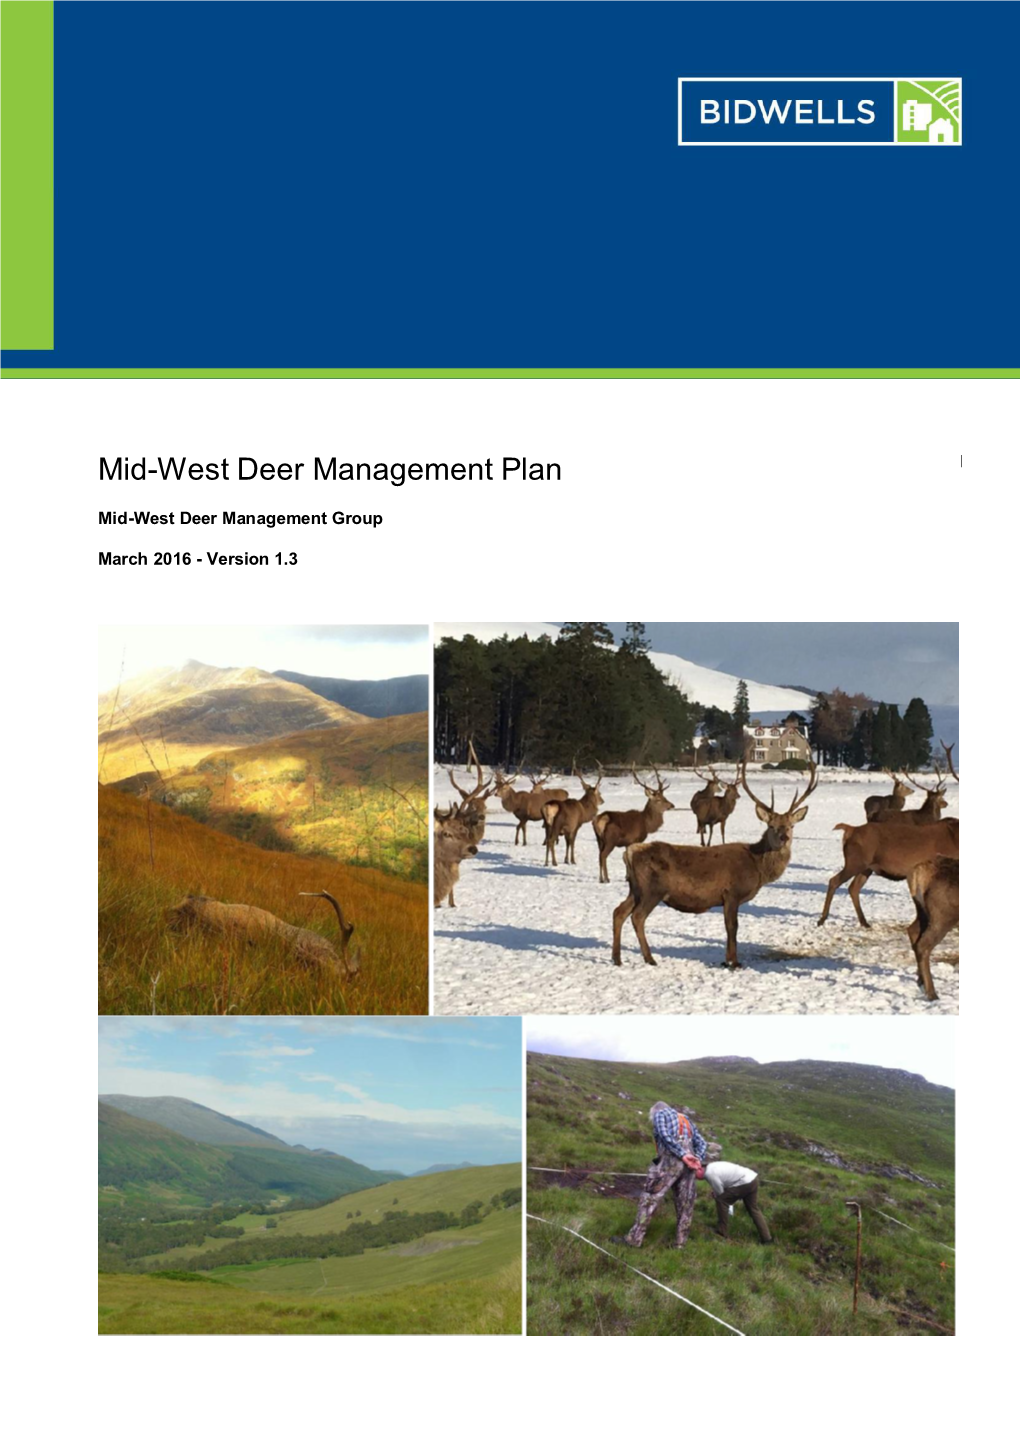 Mid-West Deer Management Plan Displaytext Cannot Span More Than One Line!